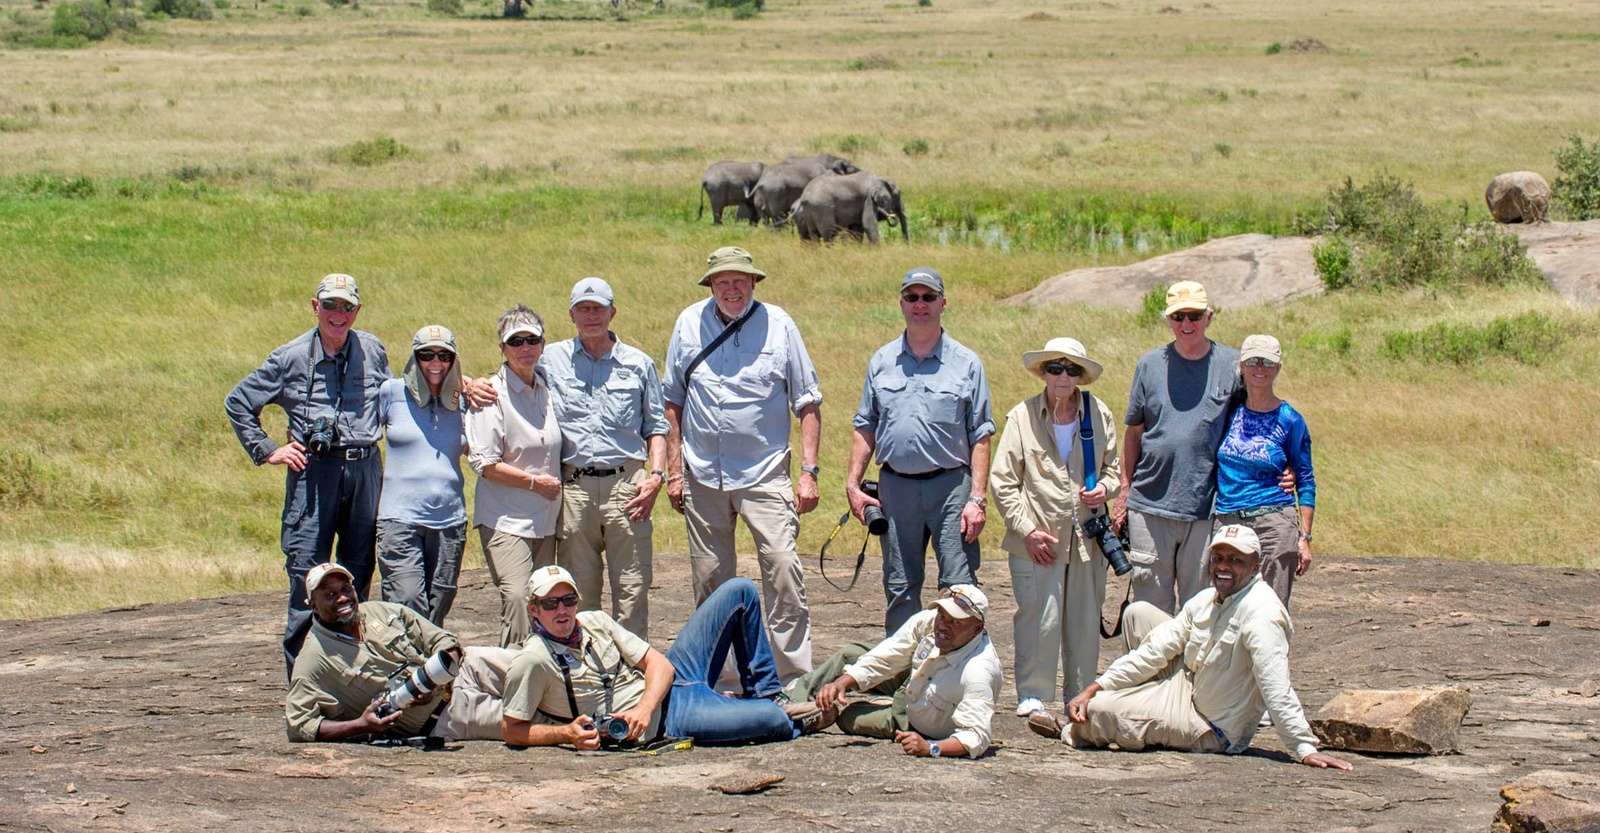 Nat Hab guests and Expedition Leaders pose in front of elephants, Ngorongoro Crater, Tanzania.